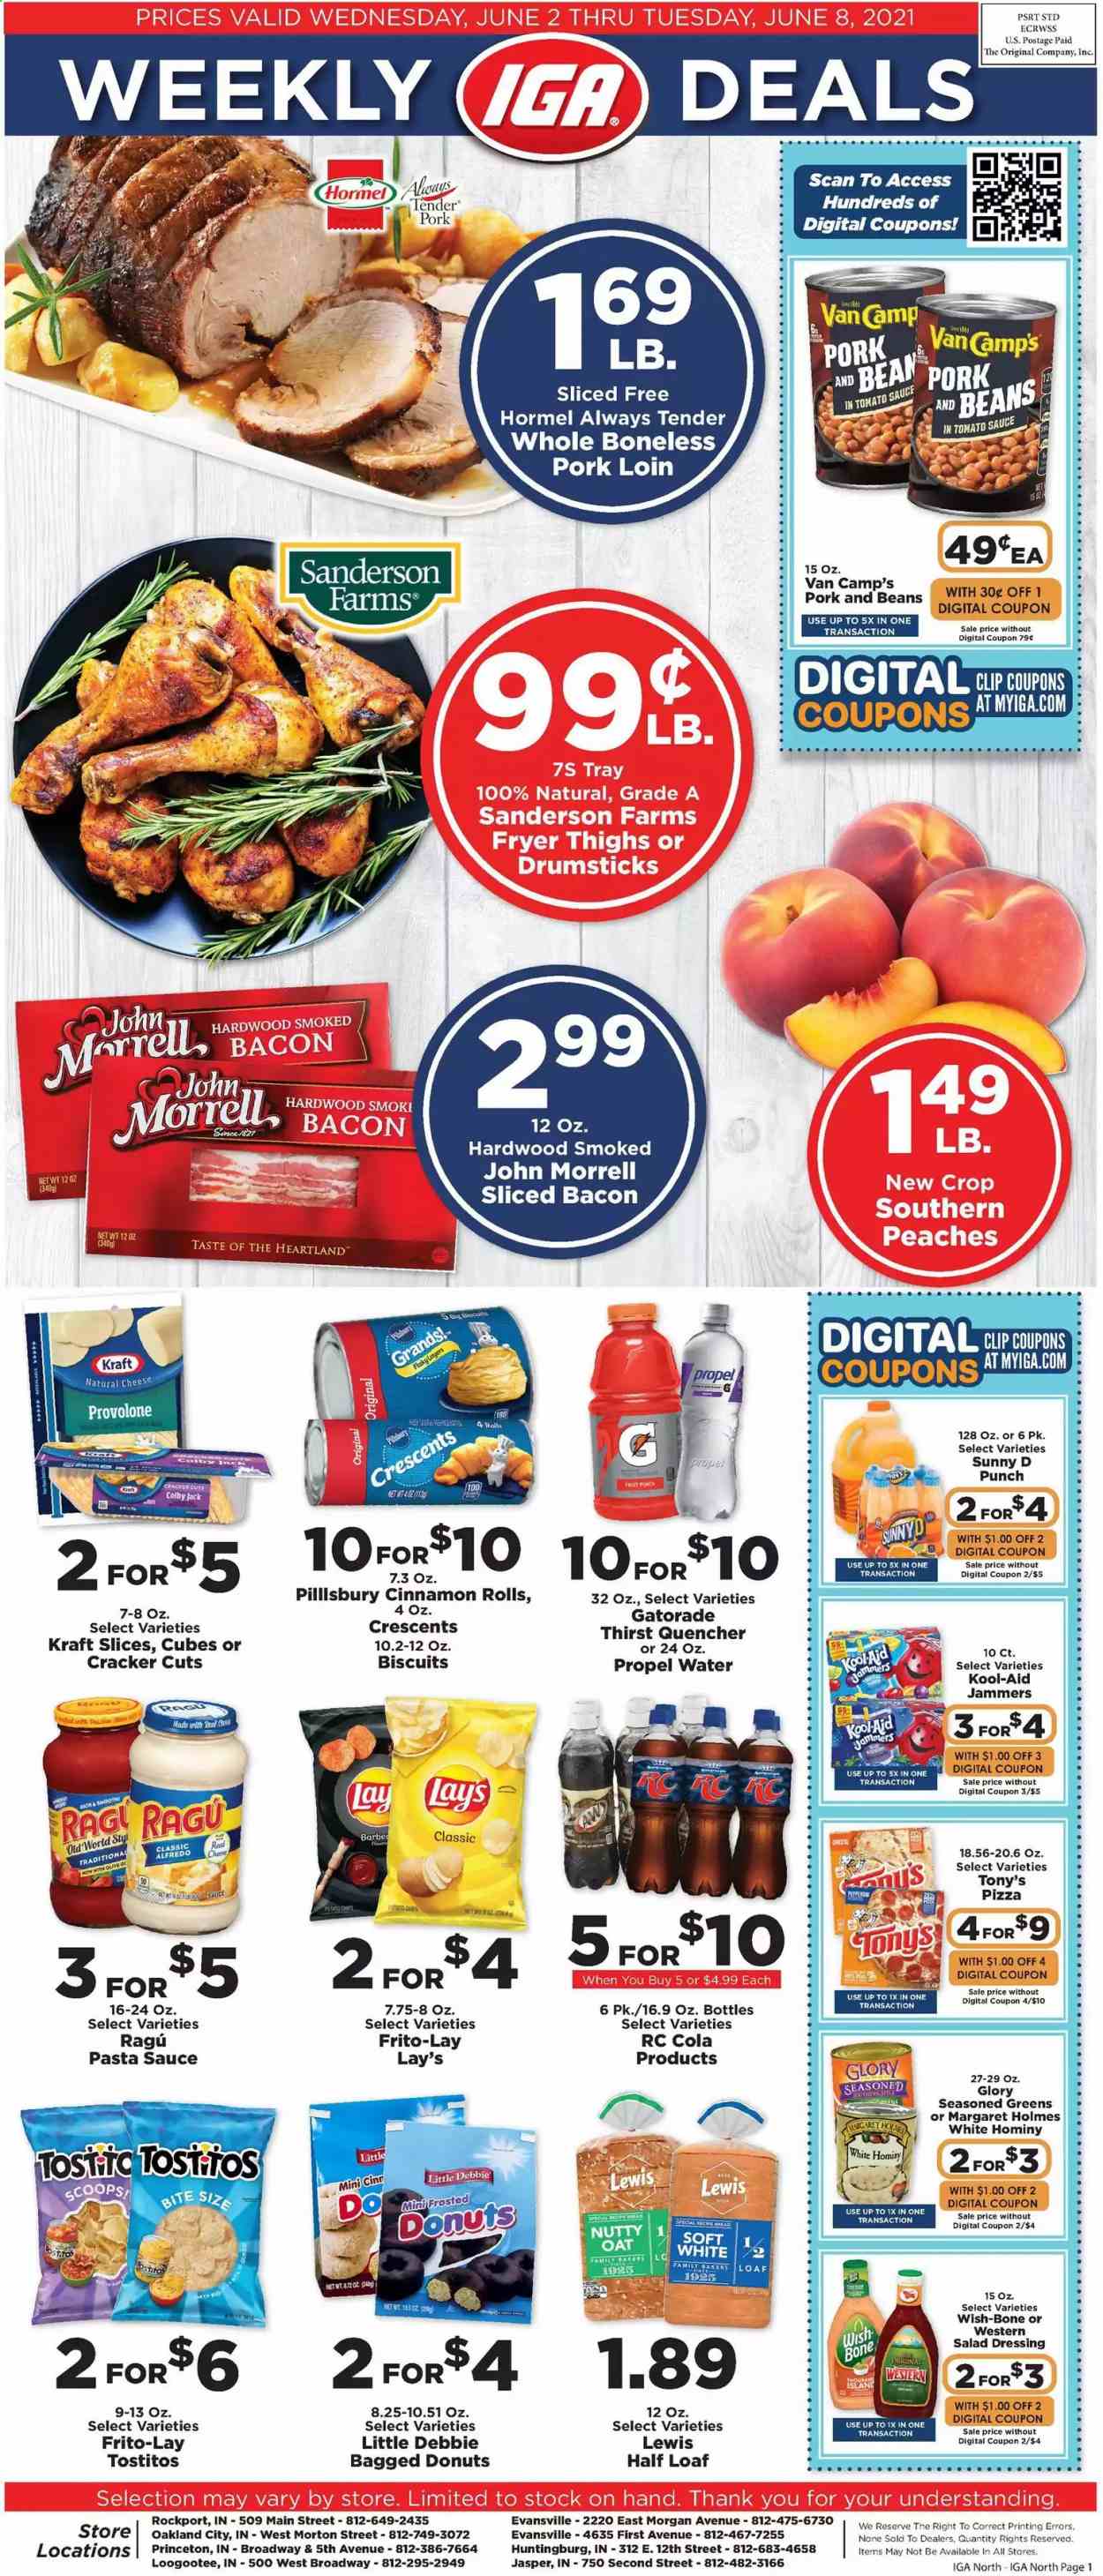 thumbnail - IGA Flyer - 06/02/2021 - 06/08/2021 - Sales products - bread, cinnamon roll, donut, beans, hake, pizza, pasta sauce, Pillsbury, Kraft®, Hormel, ragú pasta, bacon, Colby cheese, Provolone, crackers, biscuit, Lay’s, Heartland, Frito-Lay, Tostitos, oats, salad dressing, dressing, ragu, Gatorade, pork loin, pork meat, tray, cup, Bakers, peaches. Page 1.